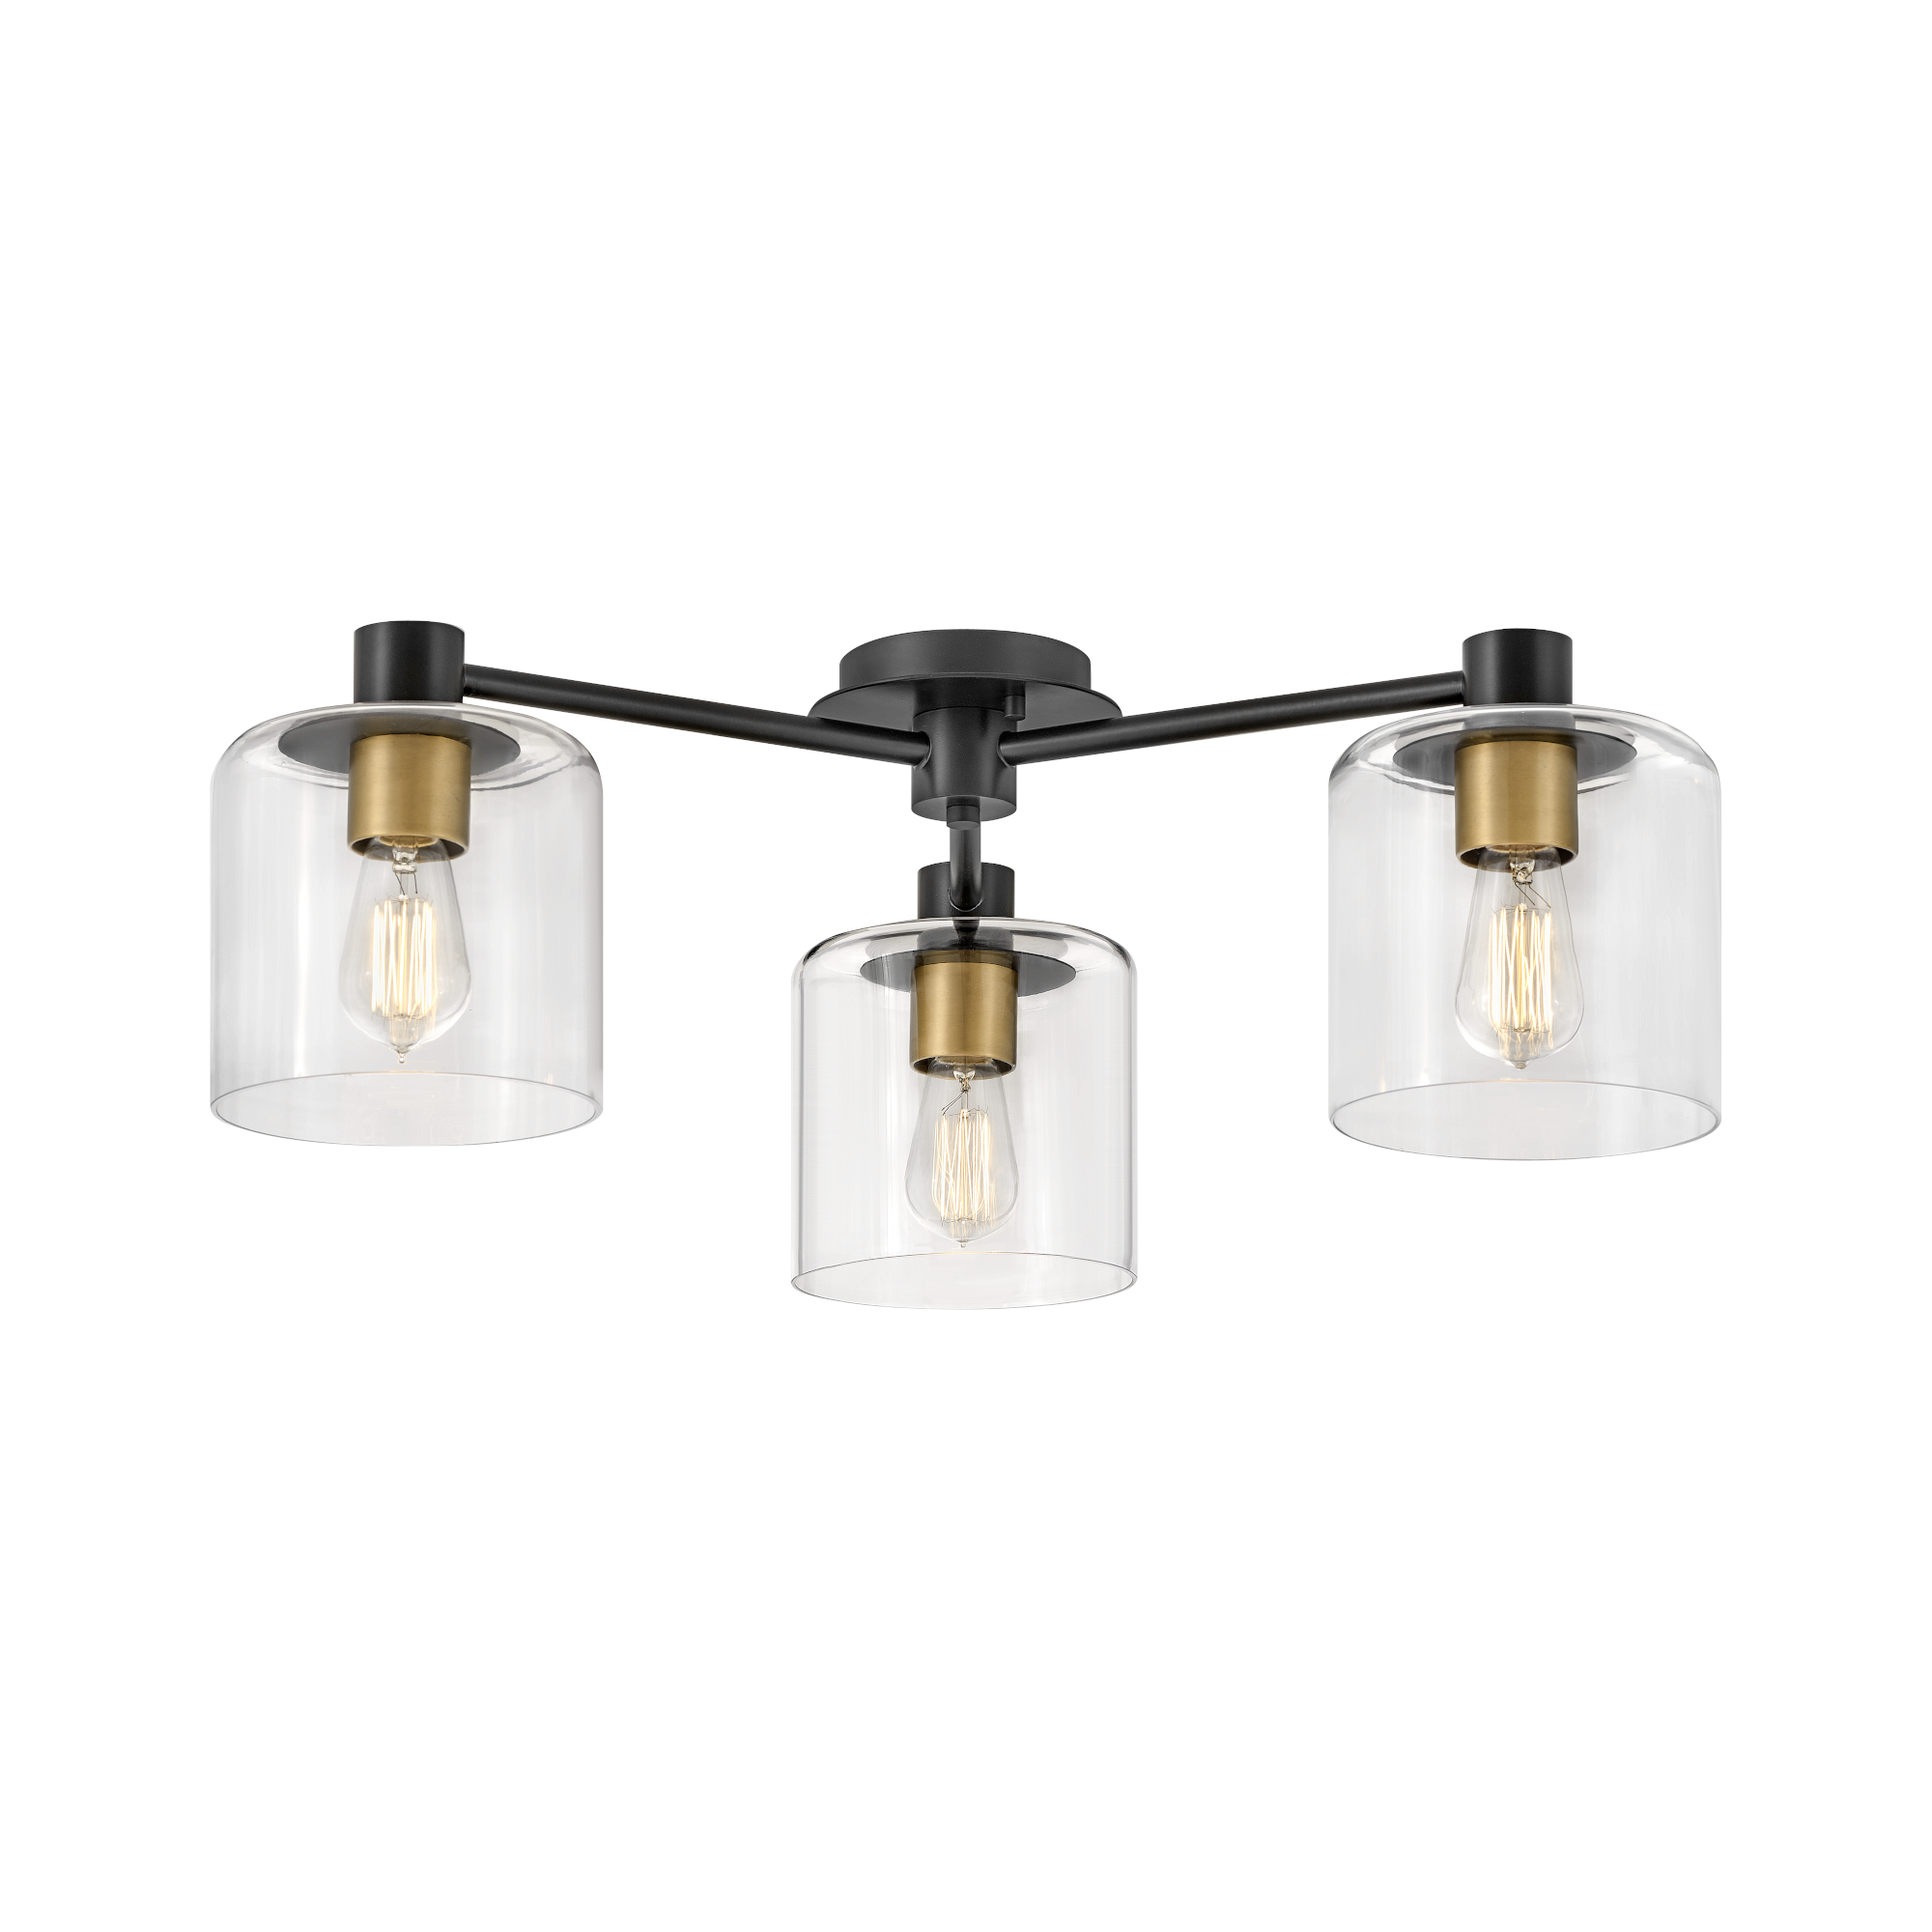 Product image of axel 3 light ceiling light black with clear glass